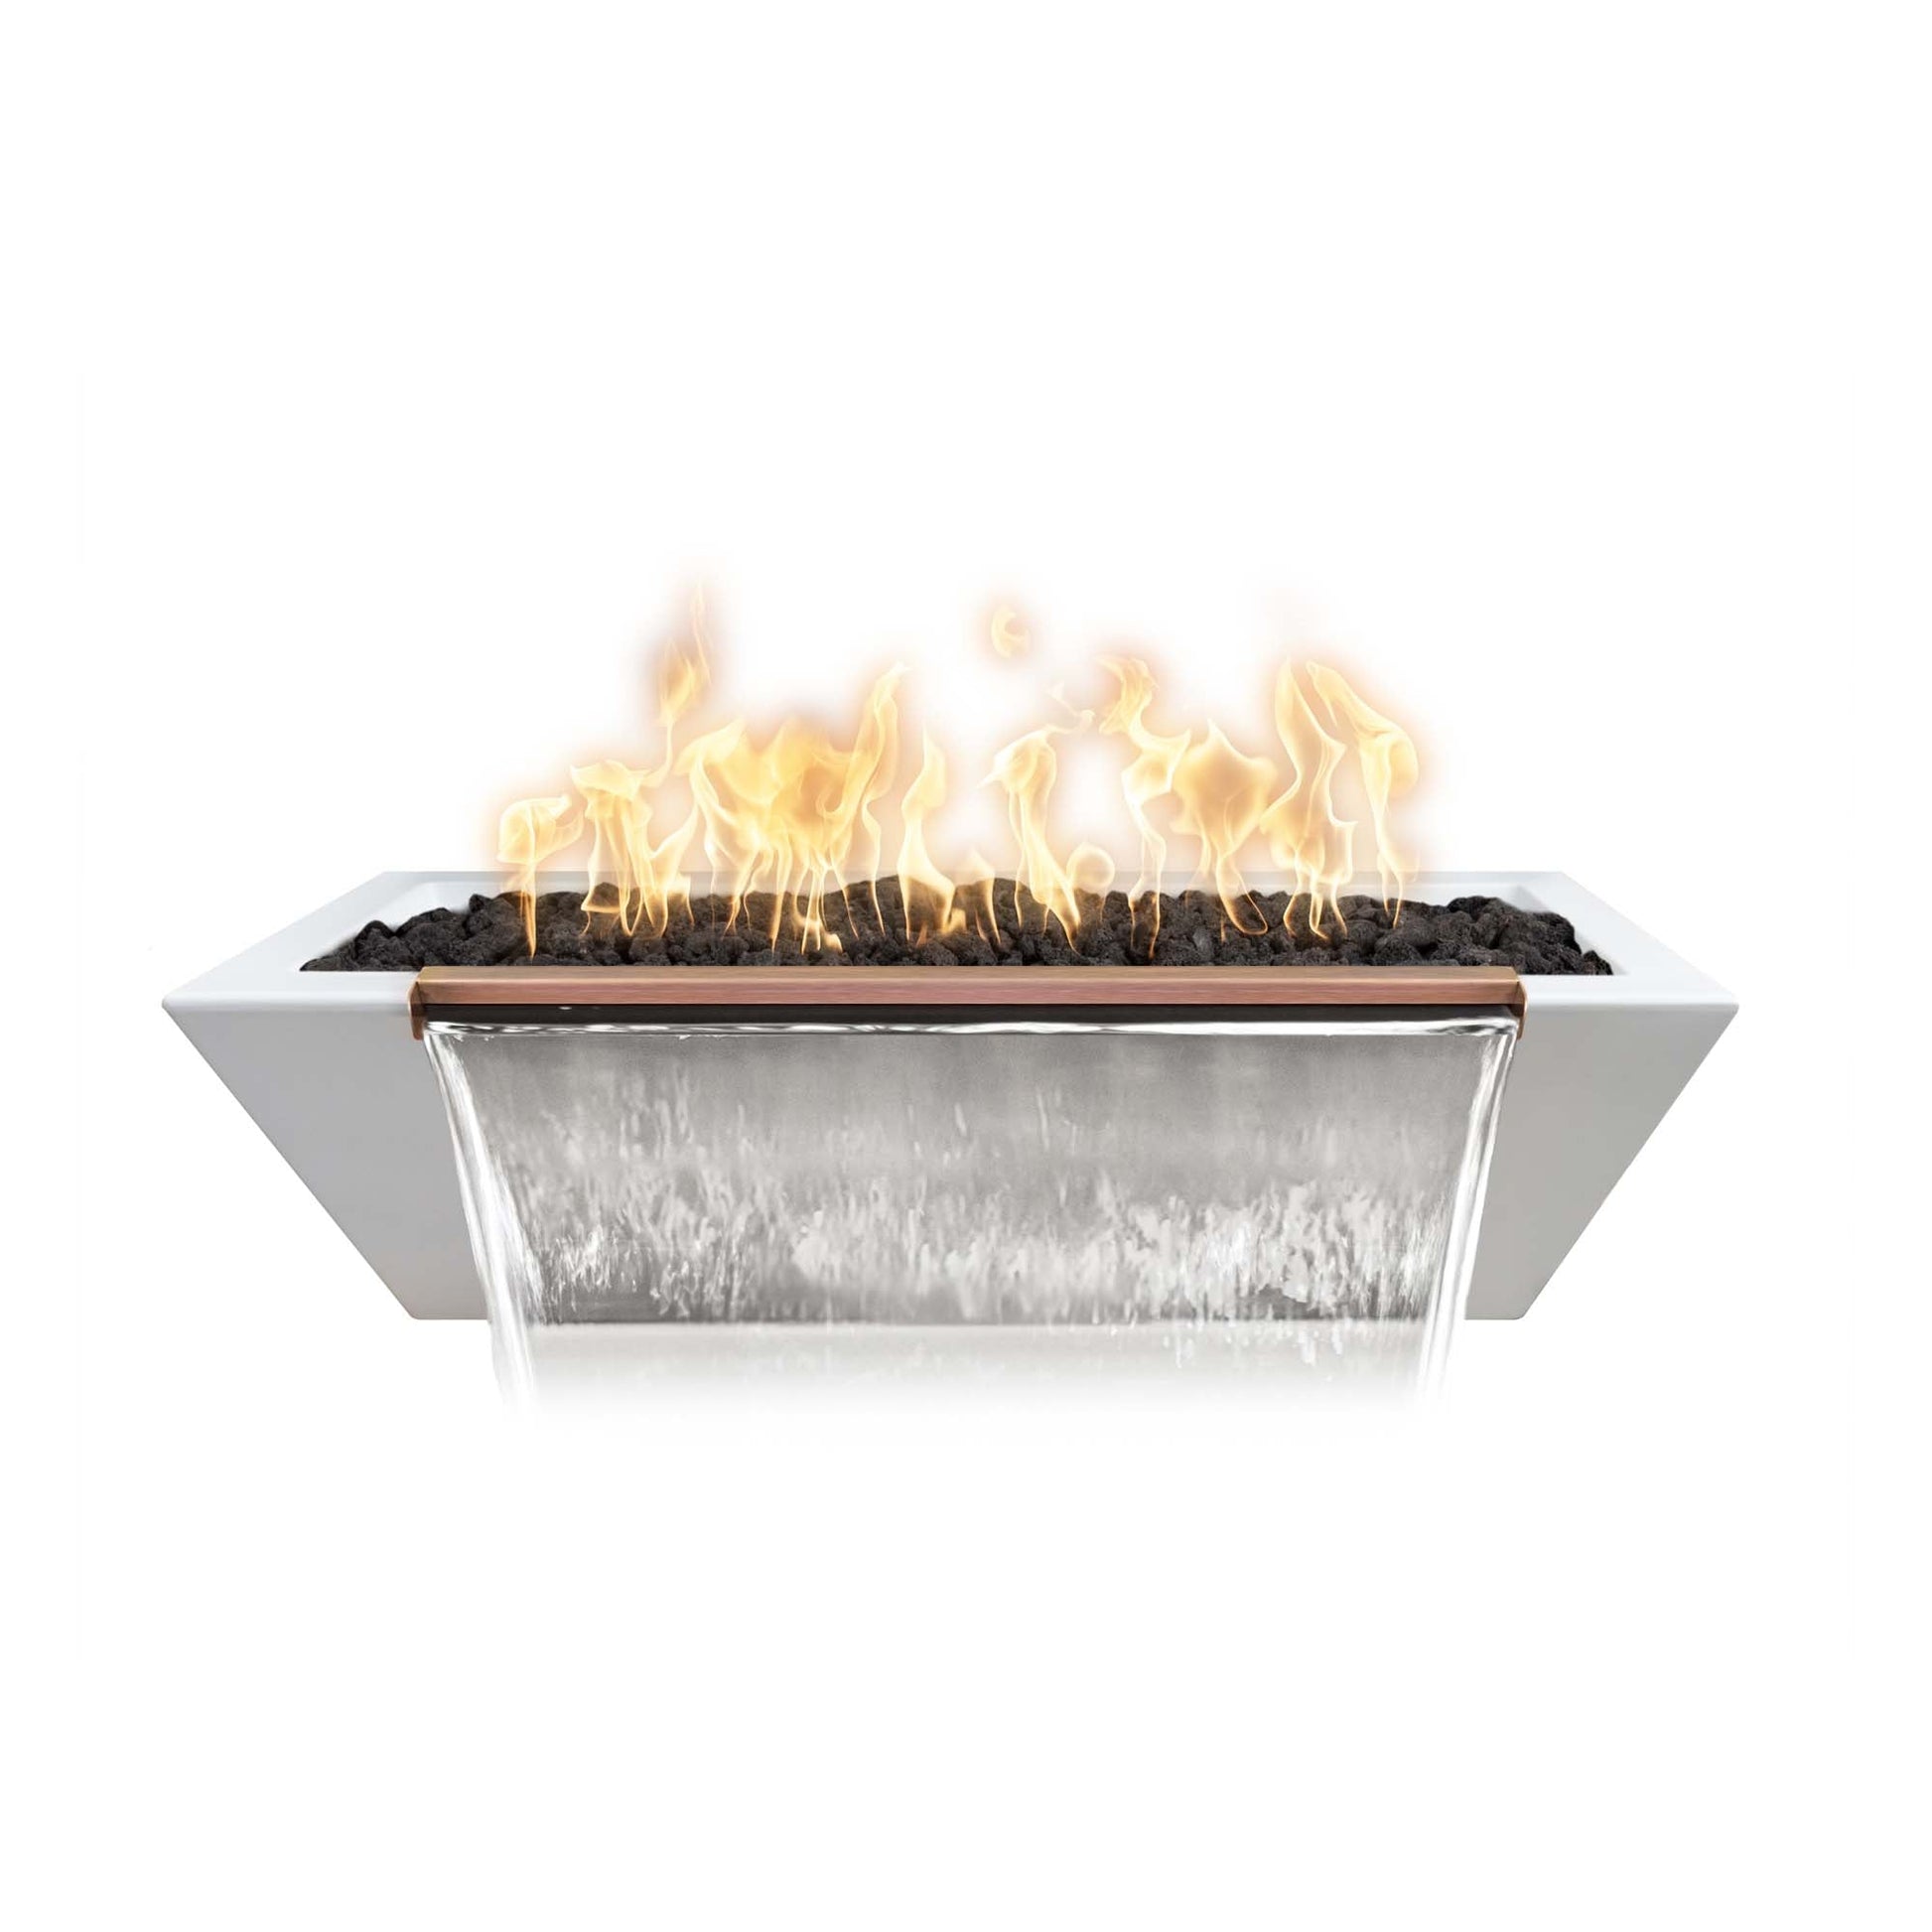 The Outdoor Plus Linear Maya 60" Black GFRC Concrete Liquid Propane Fire & Water Bowl with Match Lit with Flame Sense Ignition